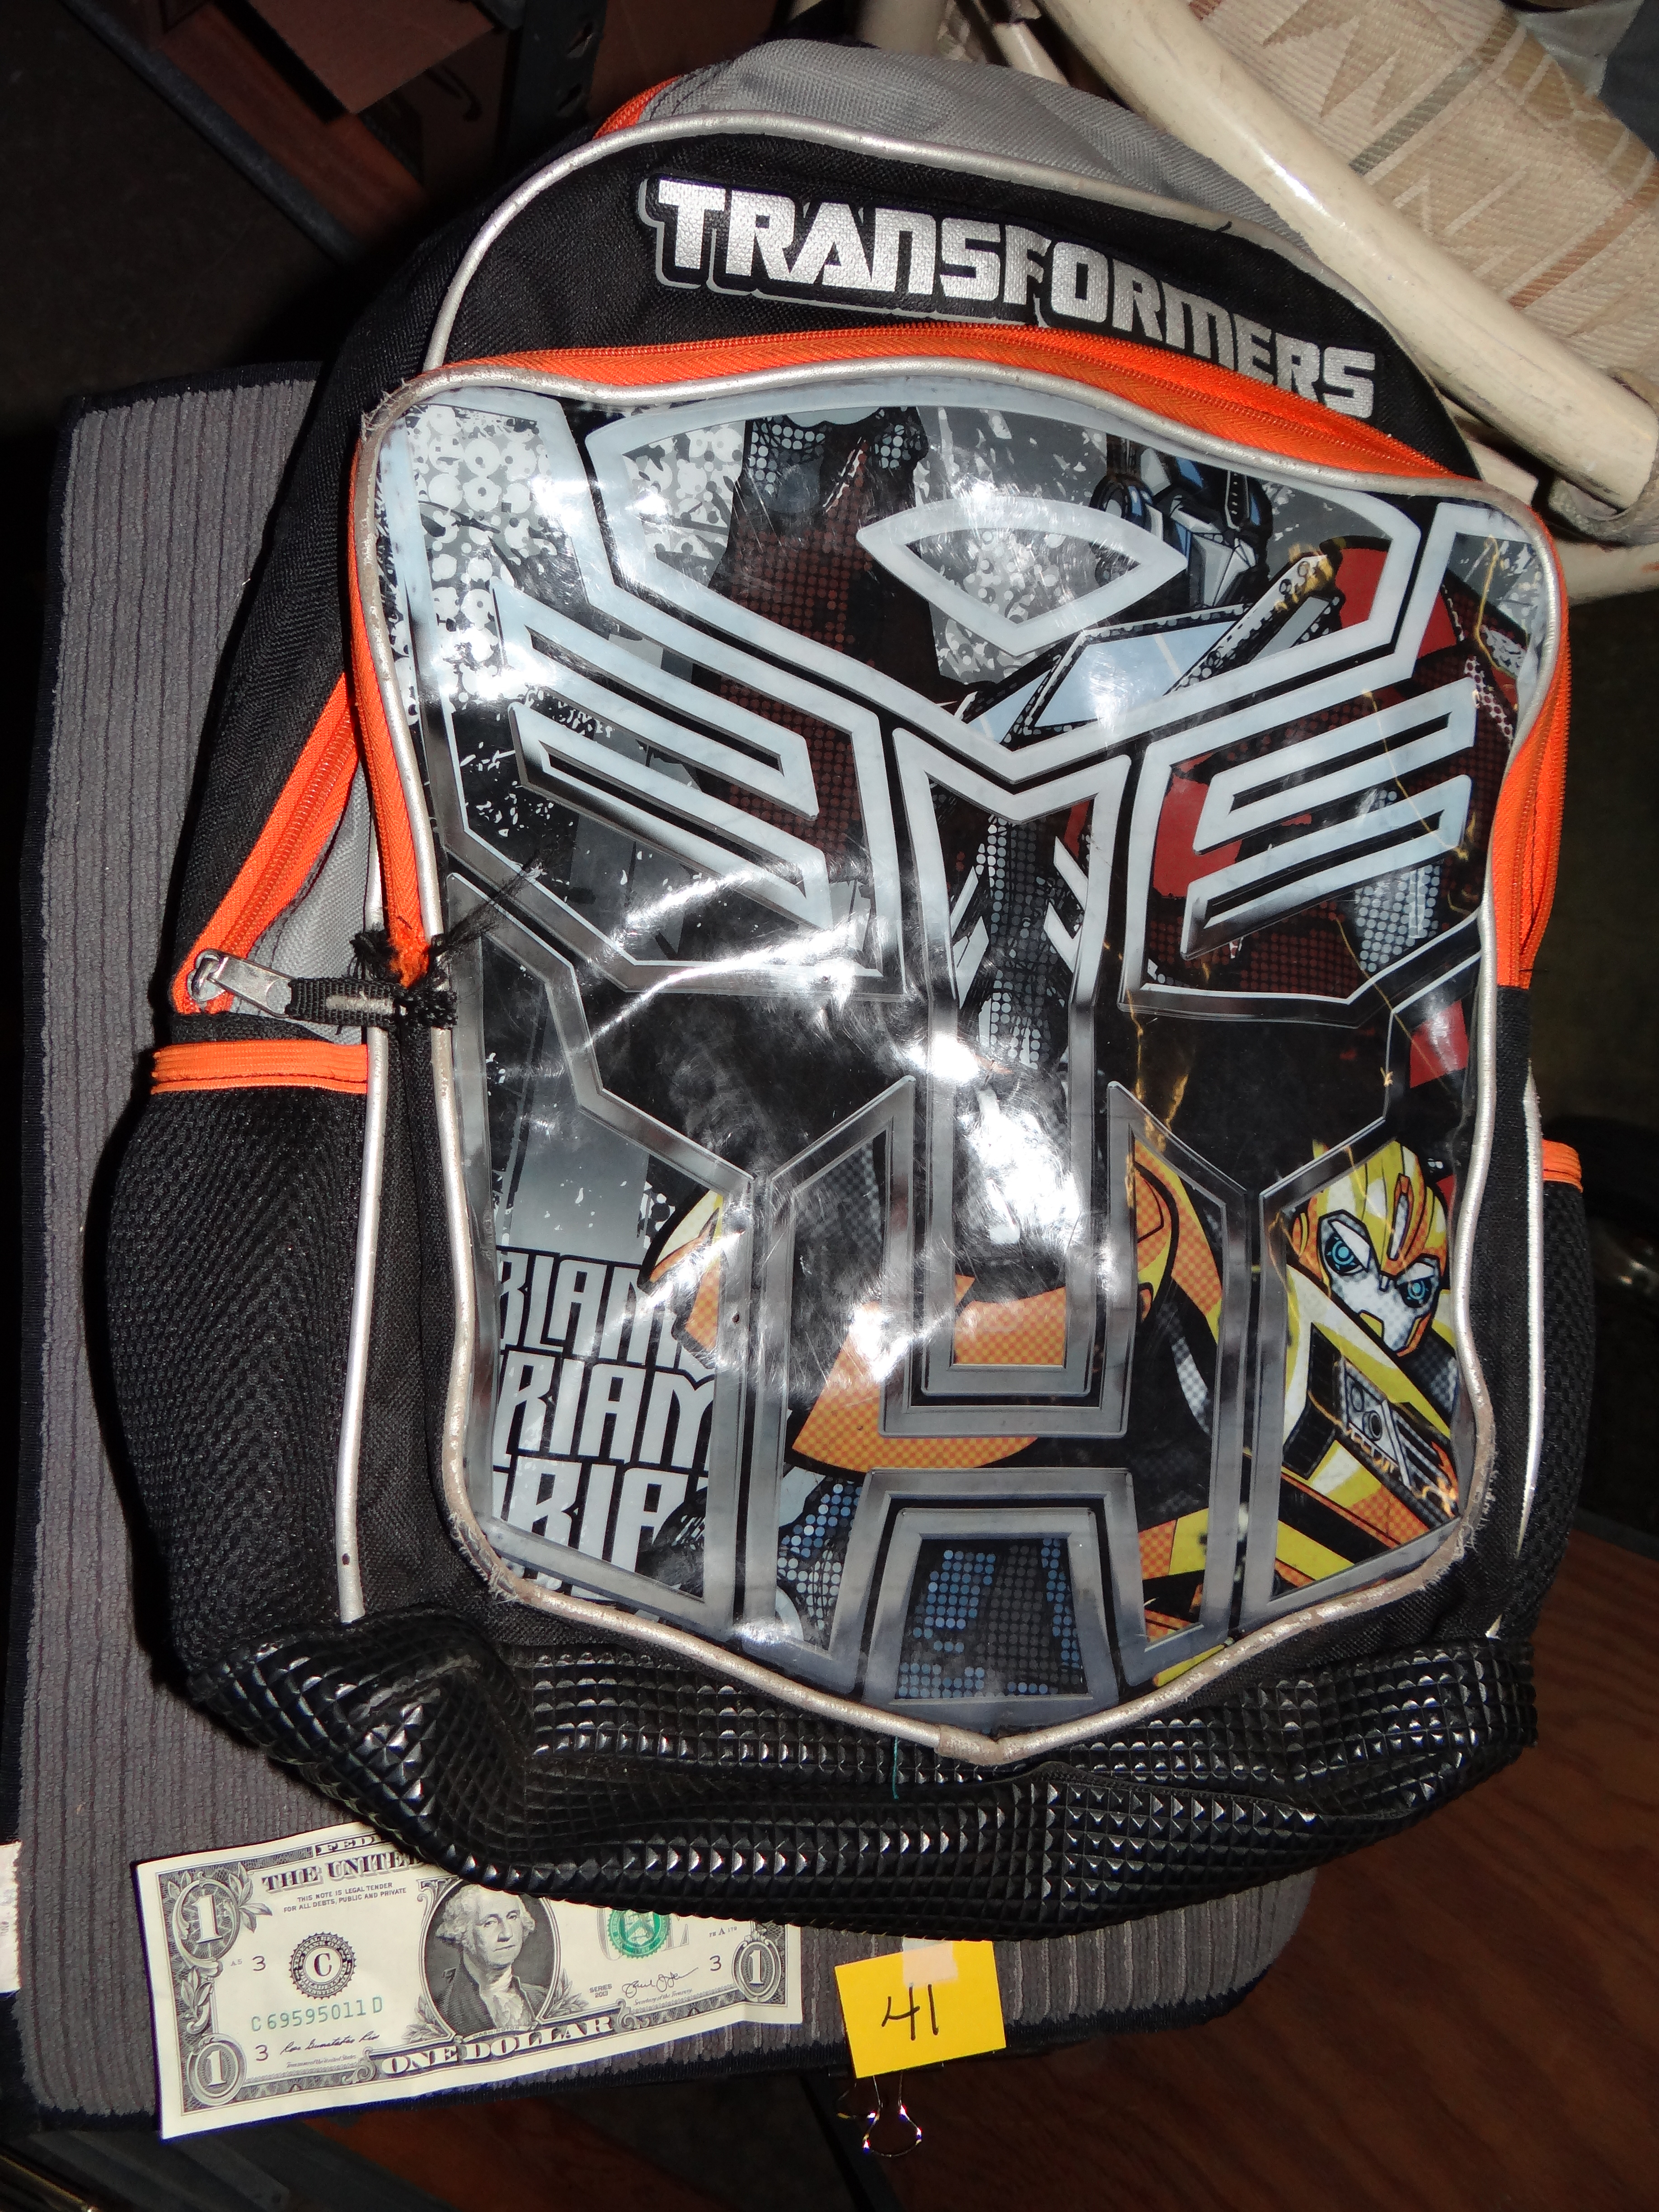 41-Transformers Backpack in Great Condition